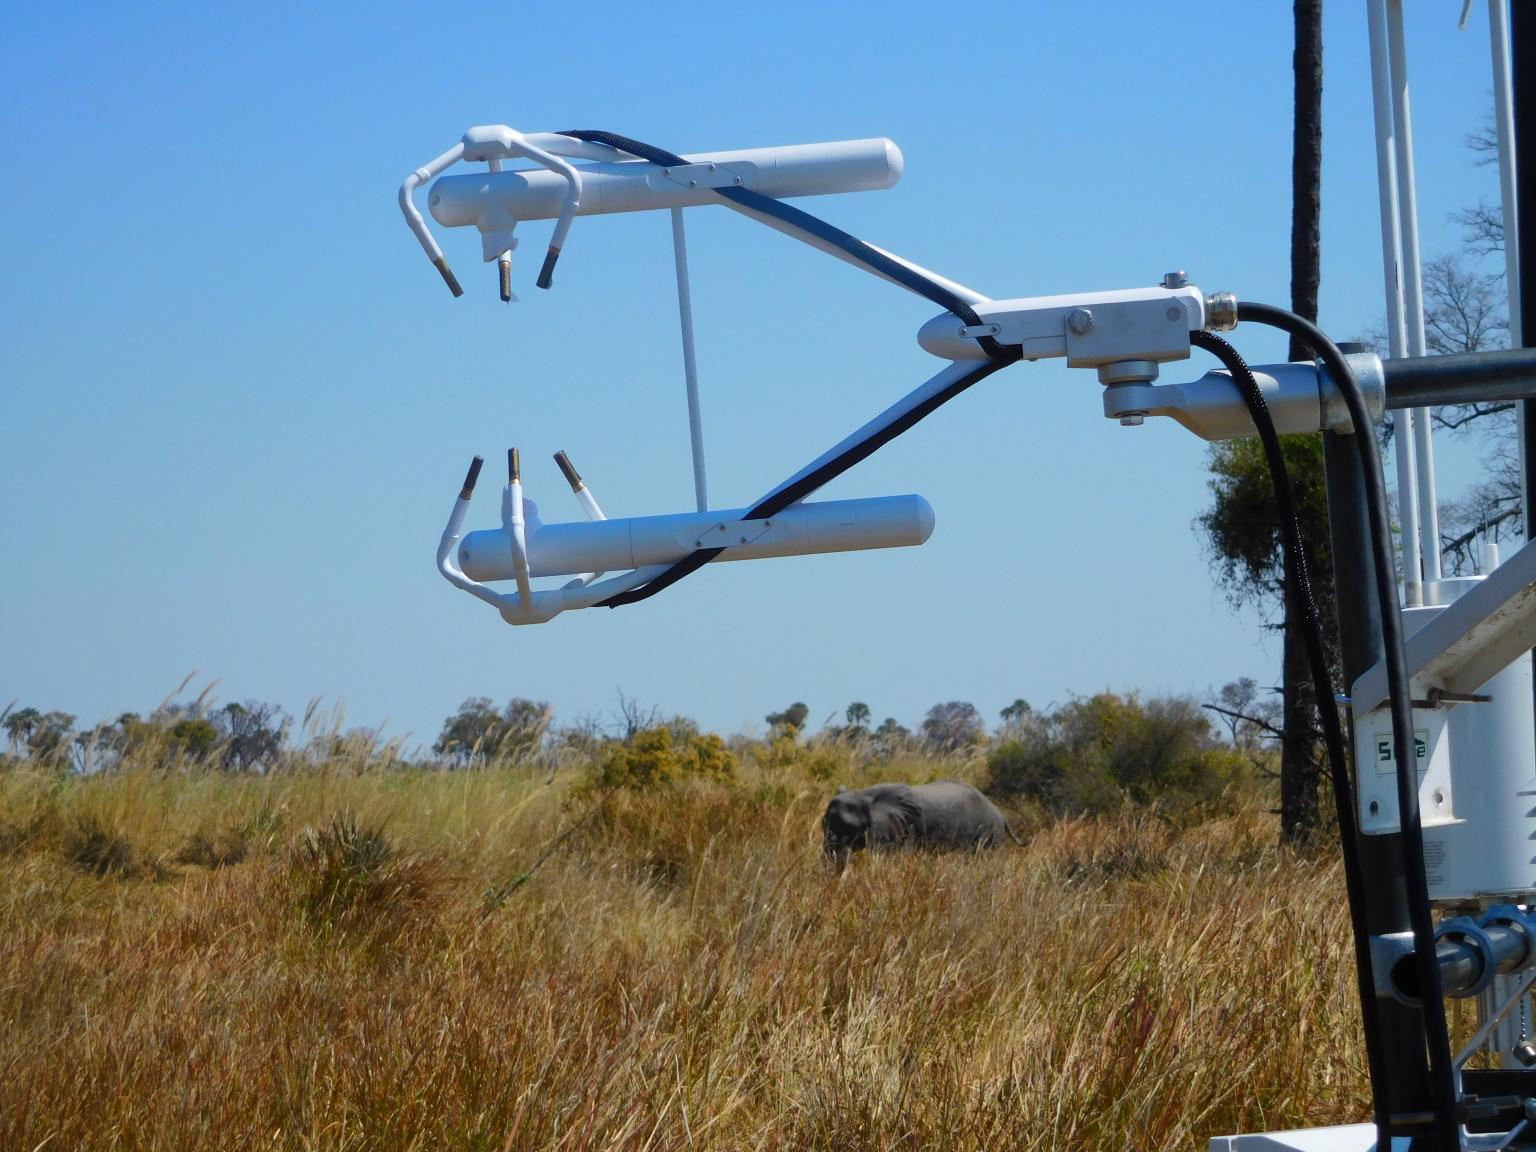 Installation of the ultrasonic anemometer interrupted by a roaming elephant